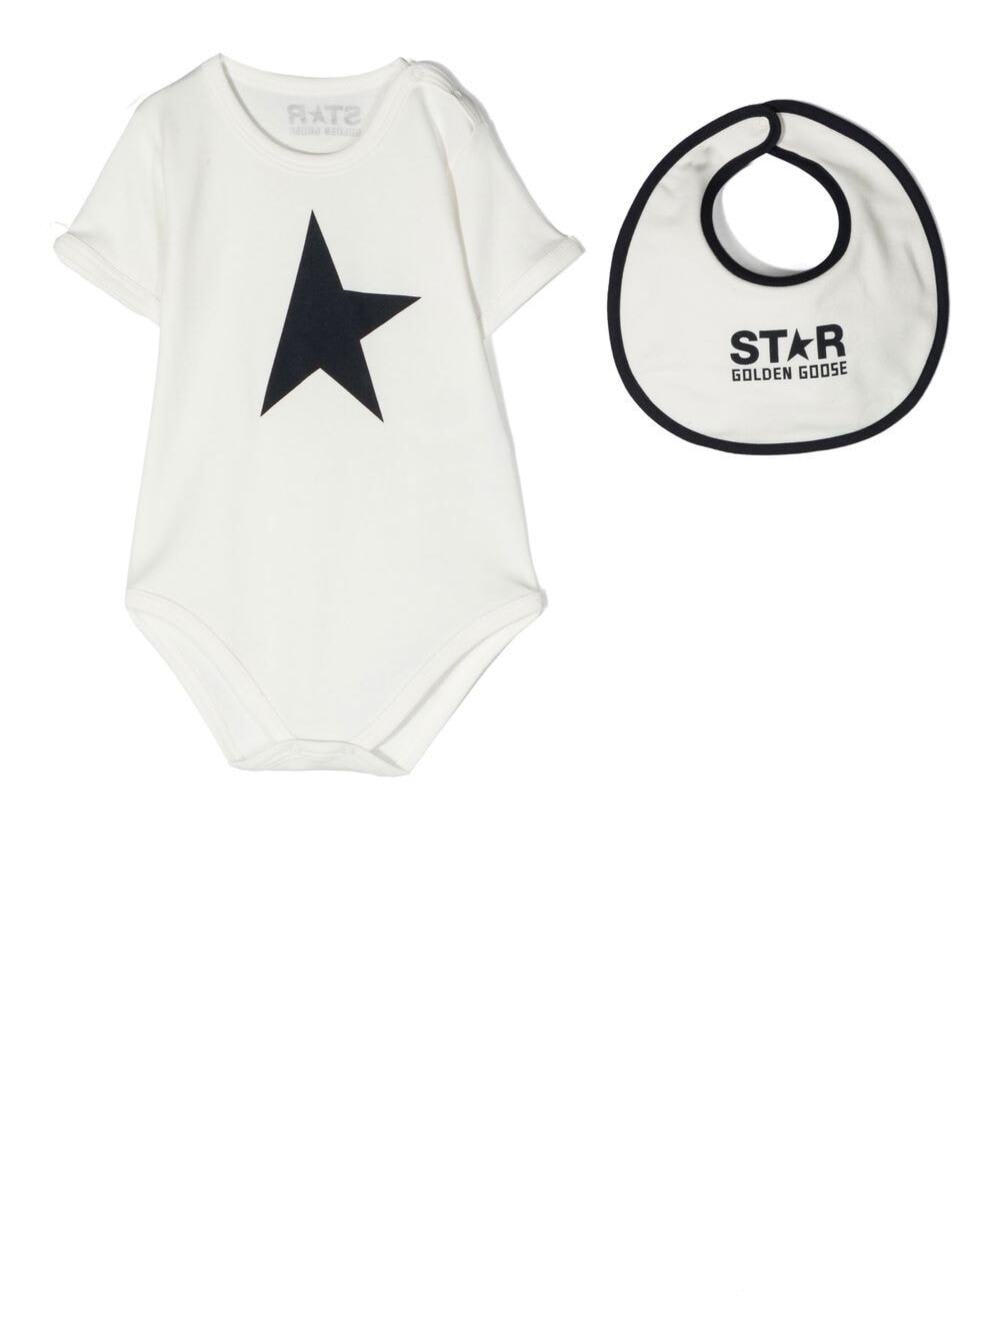 Shop Golden Goose Body And Bib Cotton With Logo Set Kids In White Navy Blue